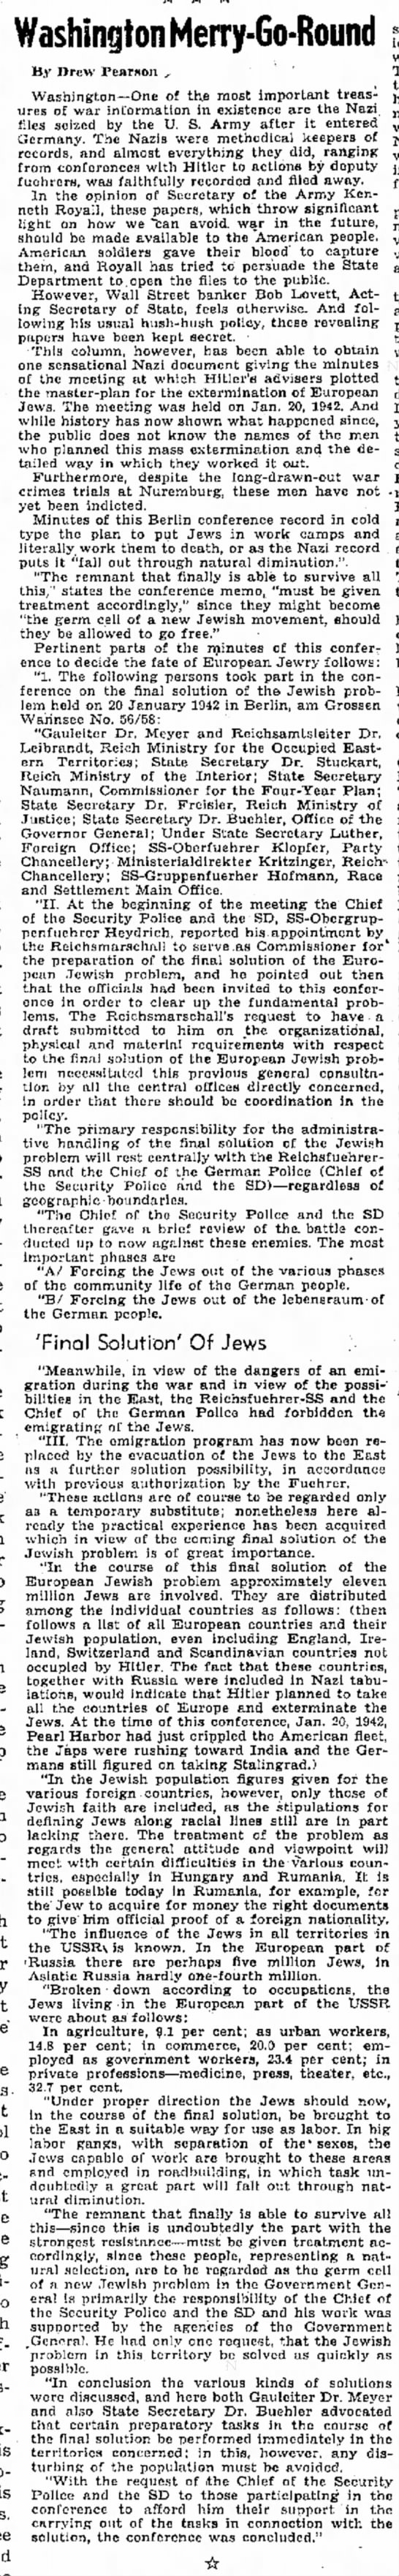 References to a Nazi document giving detail about the Final Solution and extermination of the Jews - 